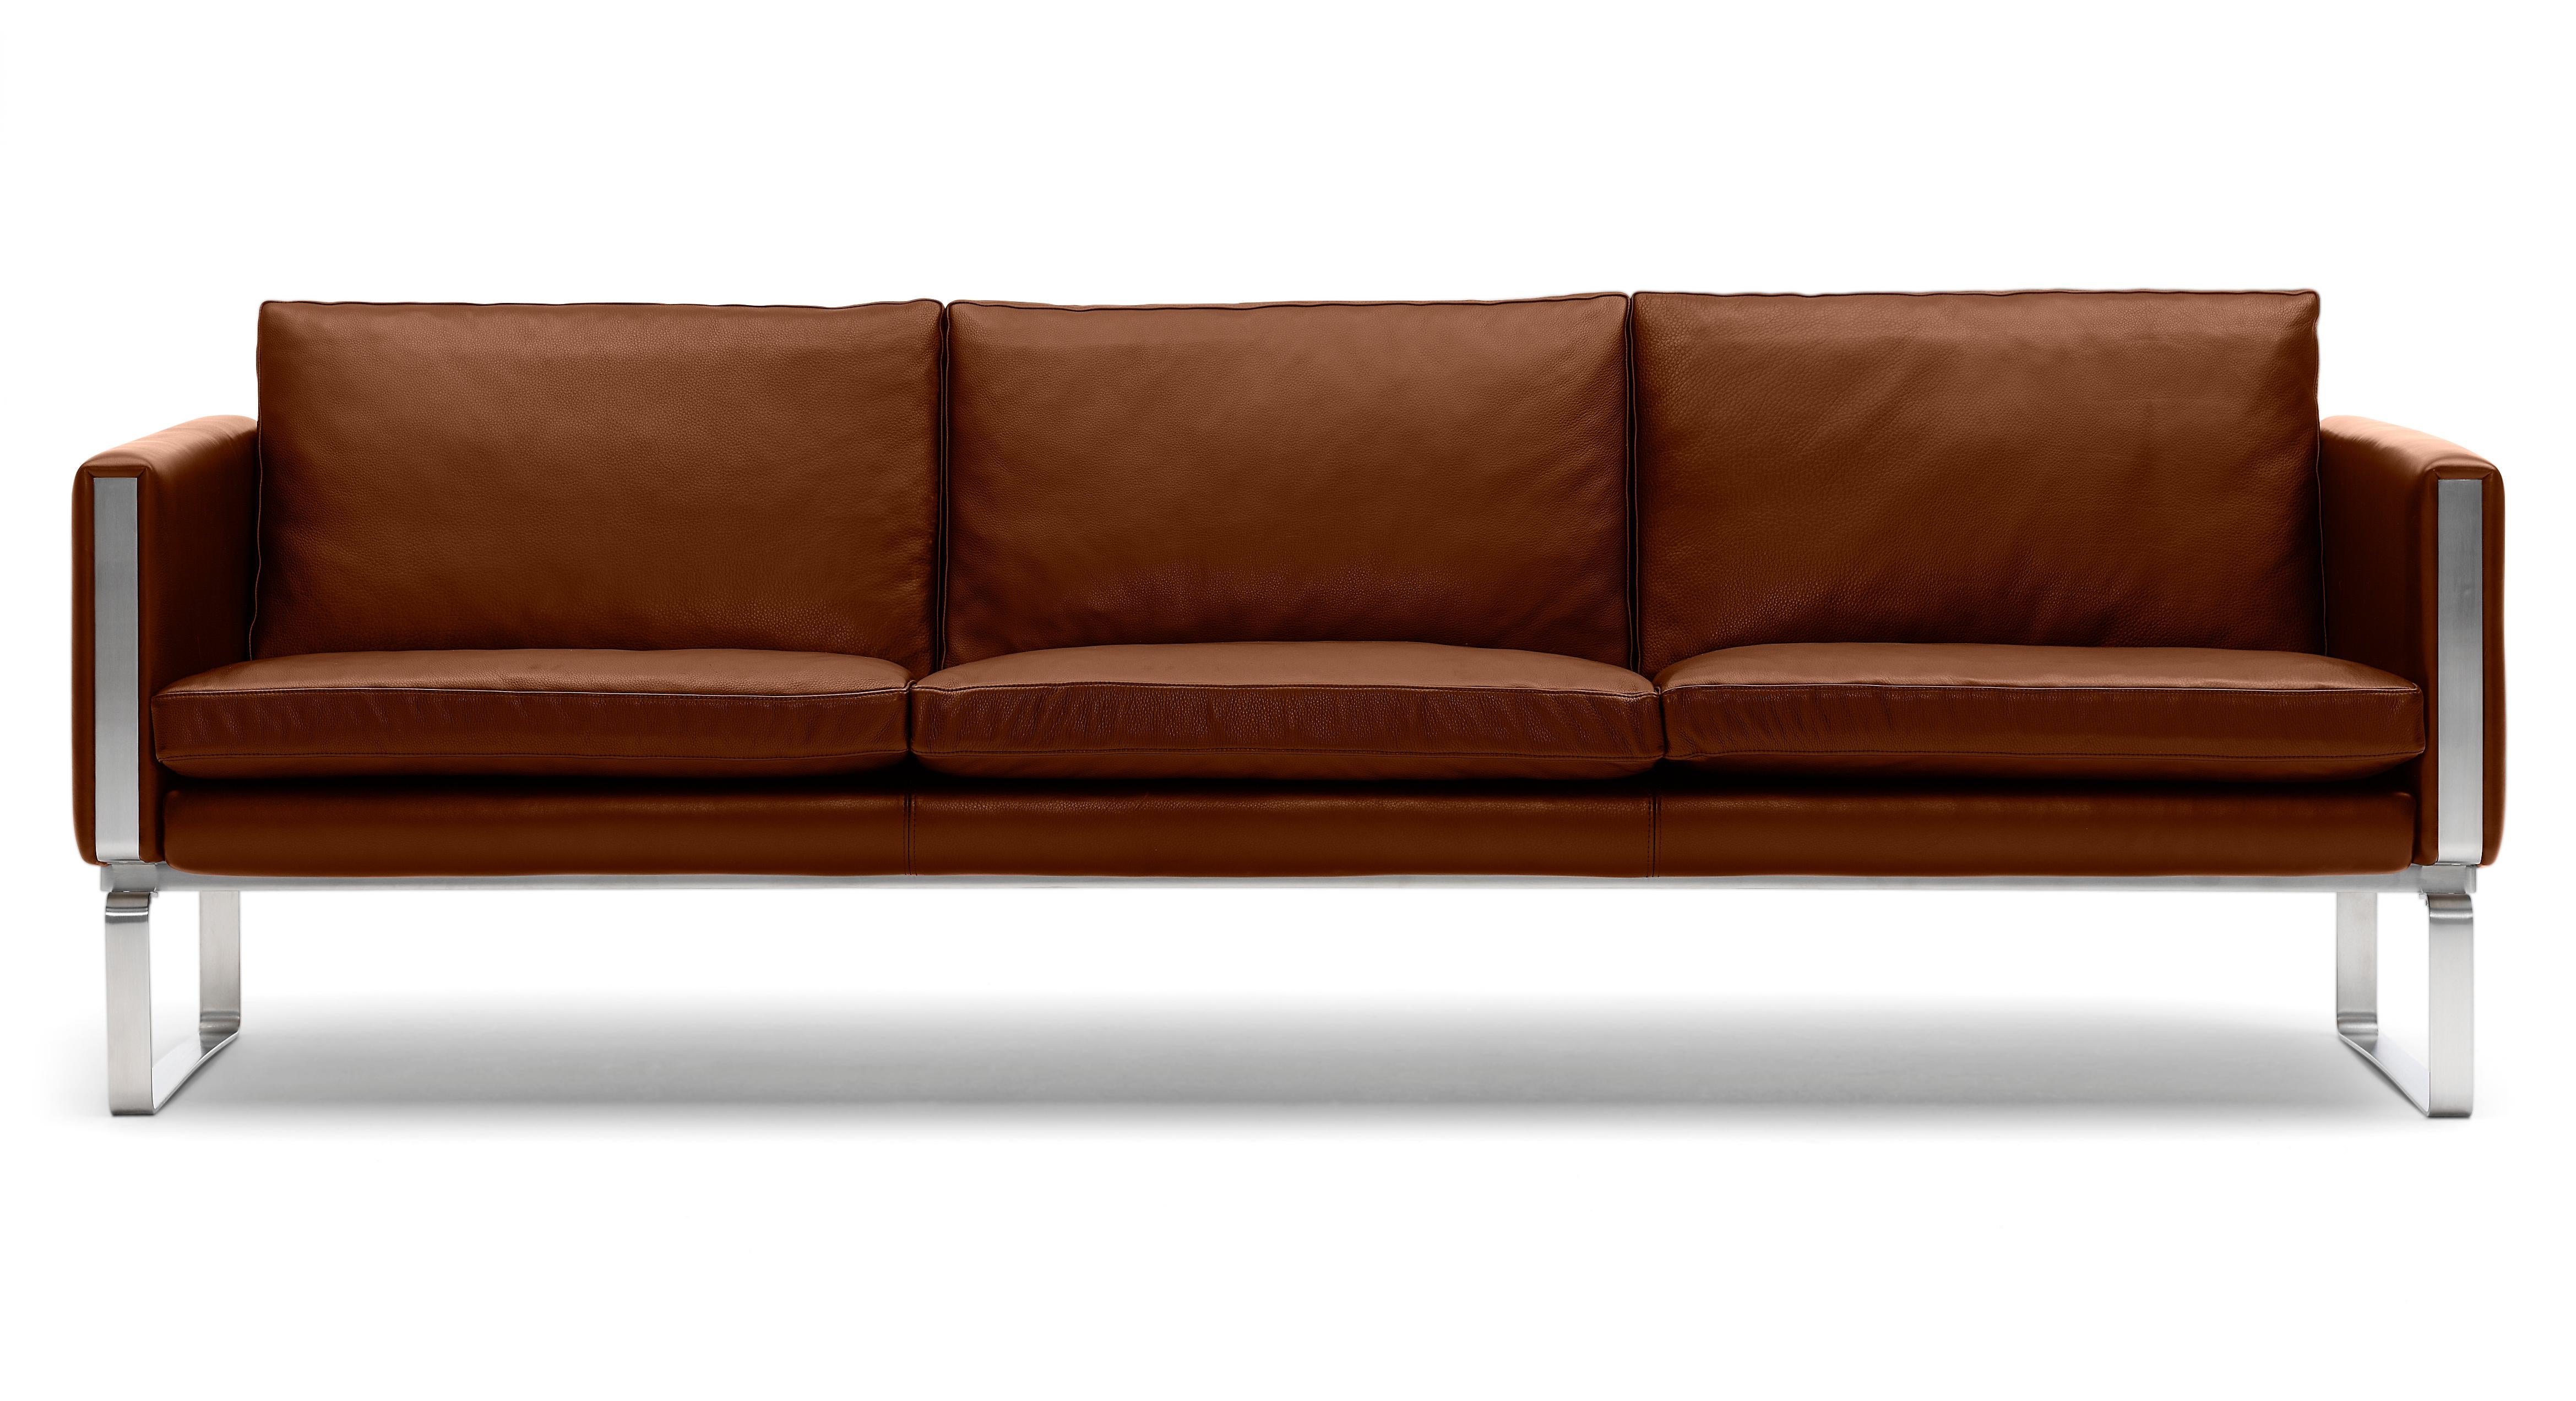 Brown (Thor 307) CH104 4-Seat Sofa in Stainless Steel Frame with Leather Seat by Hans J. Wegner